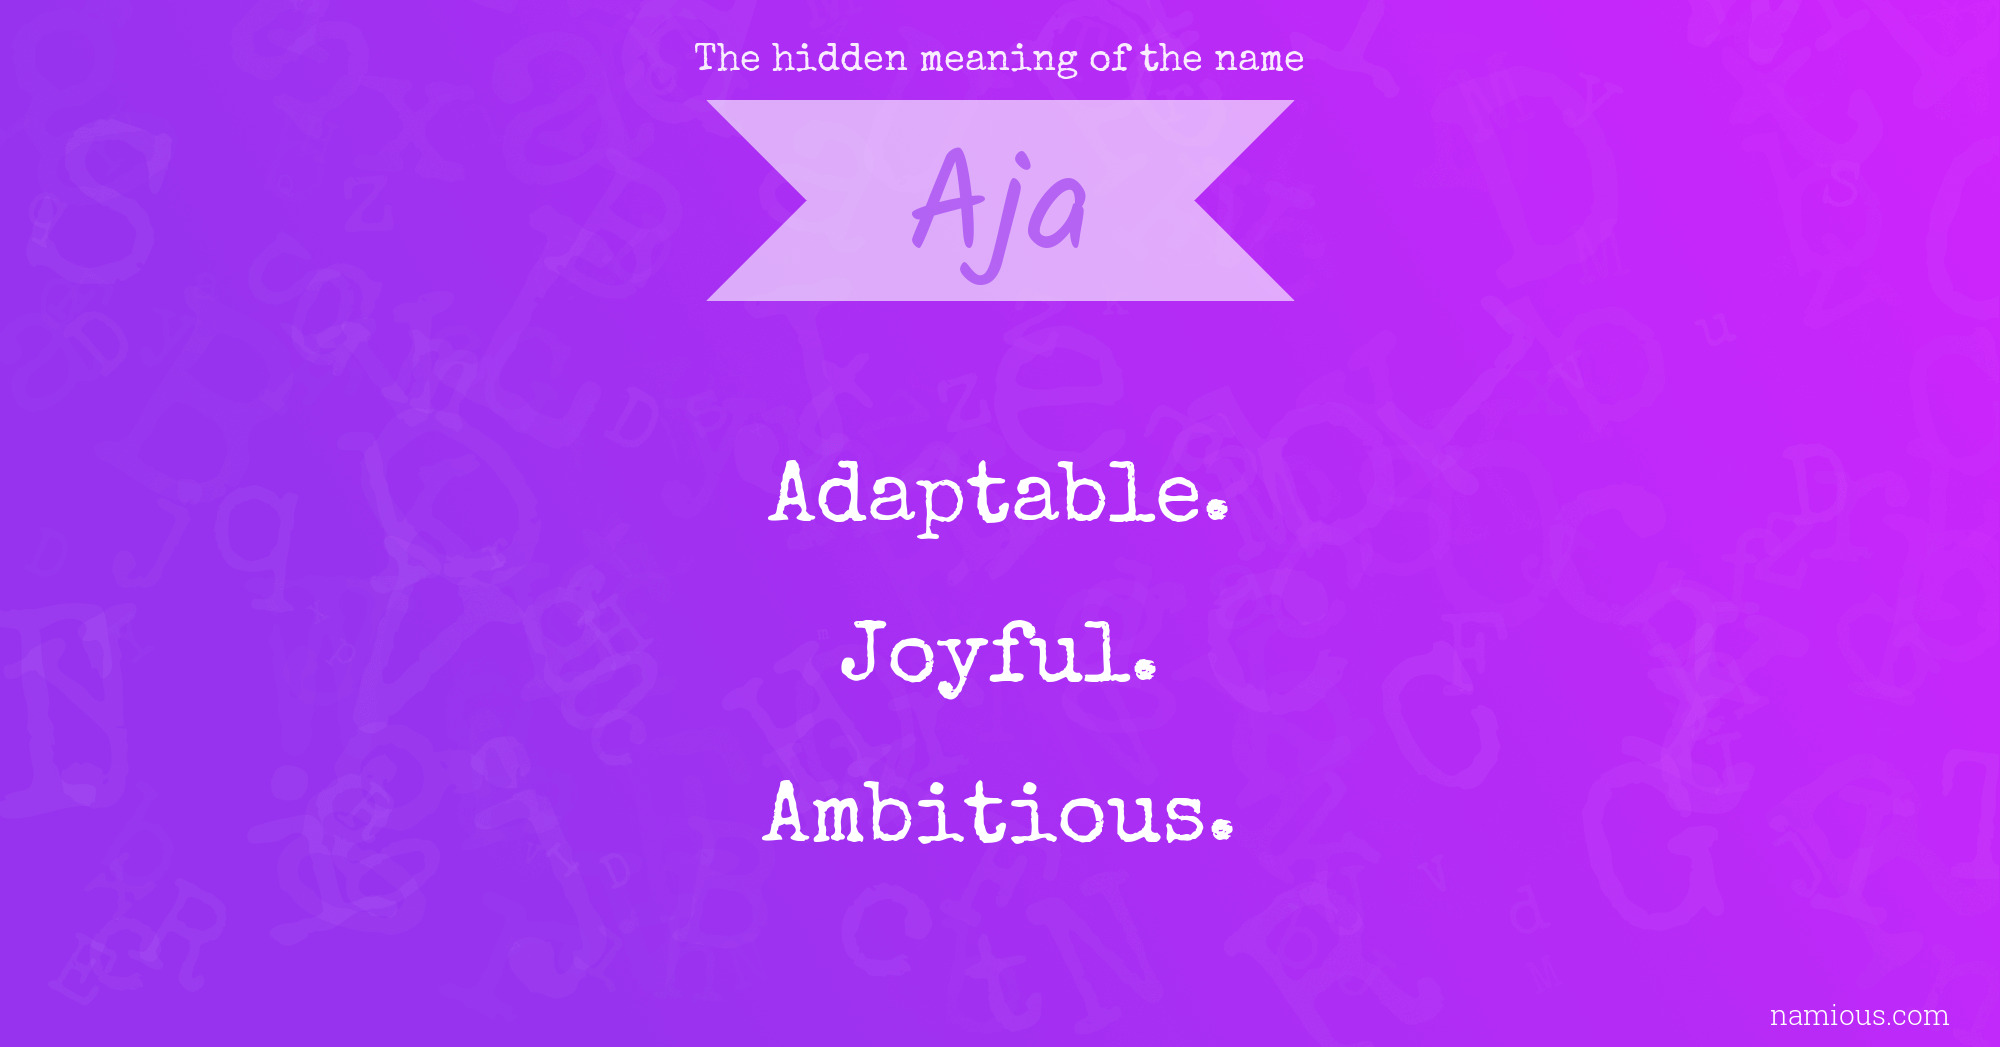 The hidden meaning of the name Aja